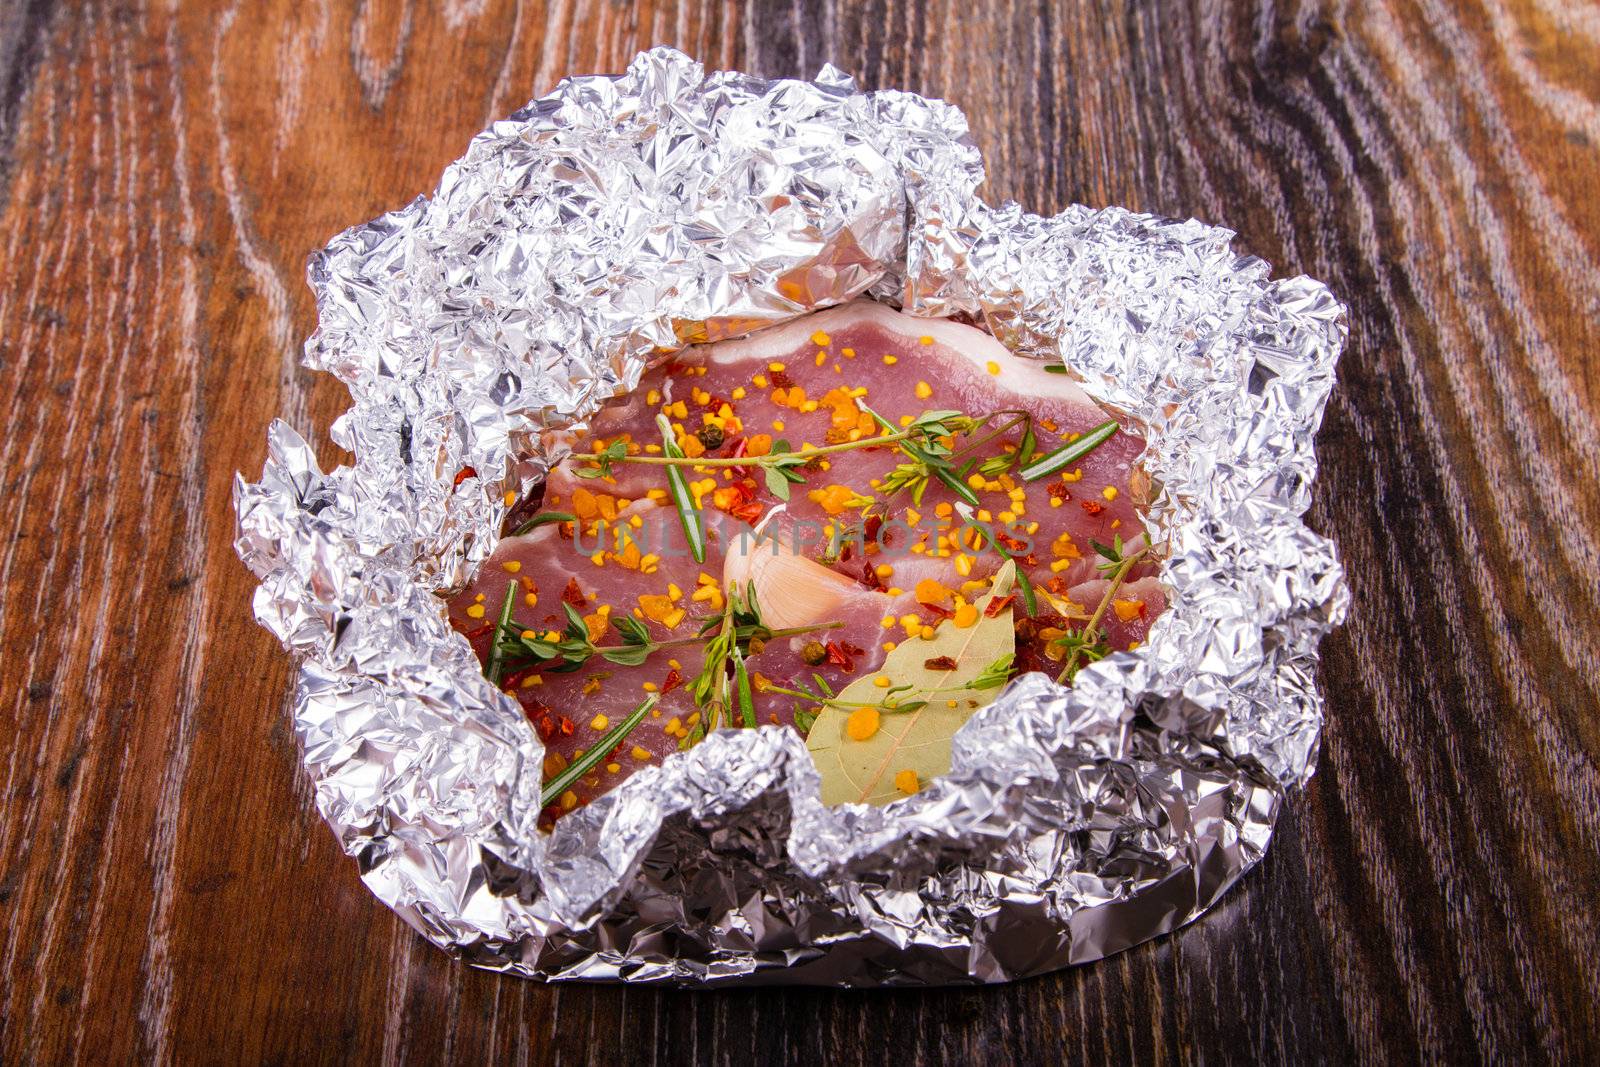 Raw fresh meat in foil with condiments